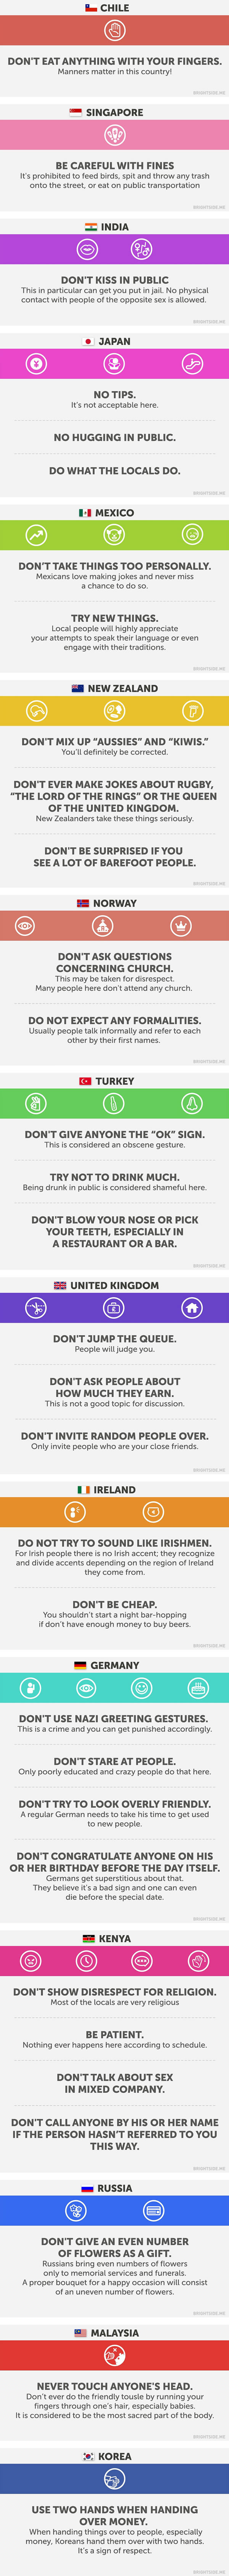 how to behave properly around the world, never do these things in these countries